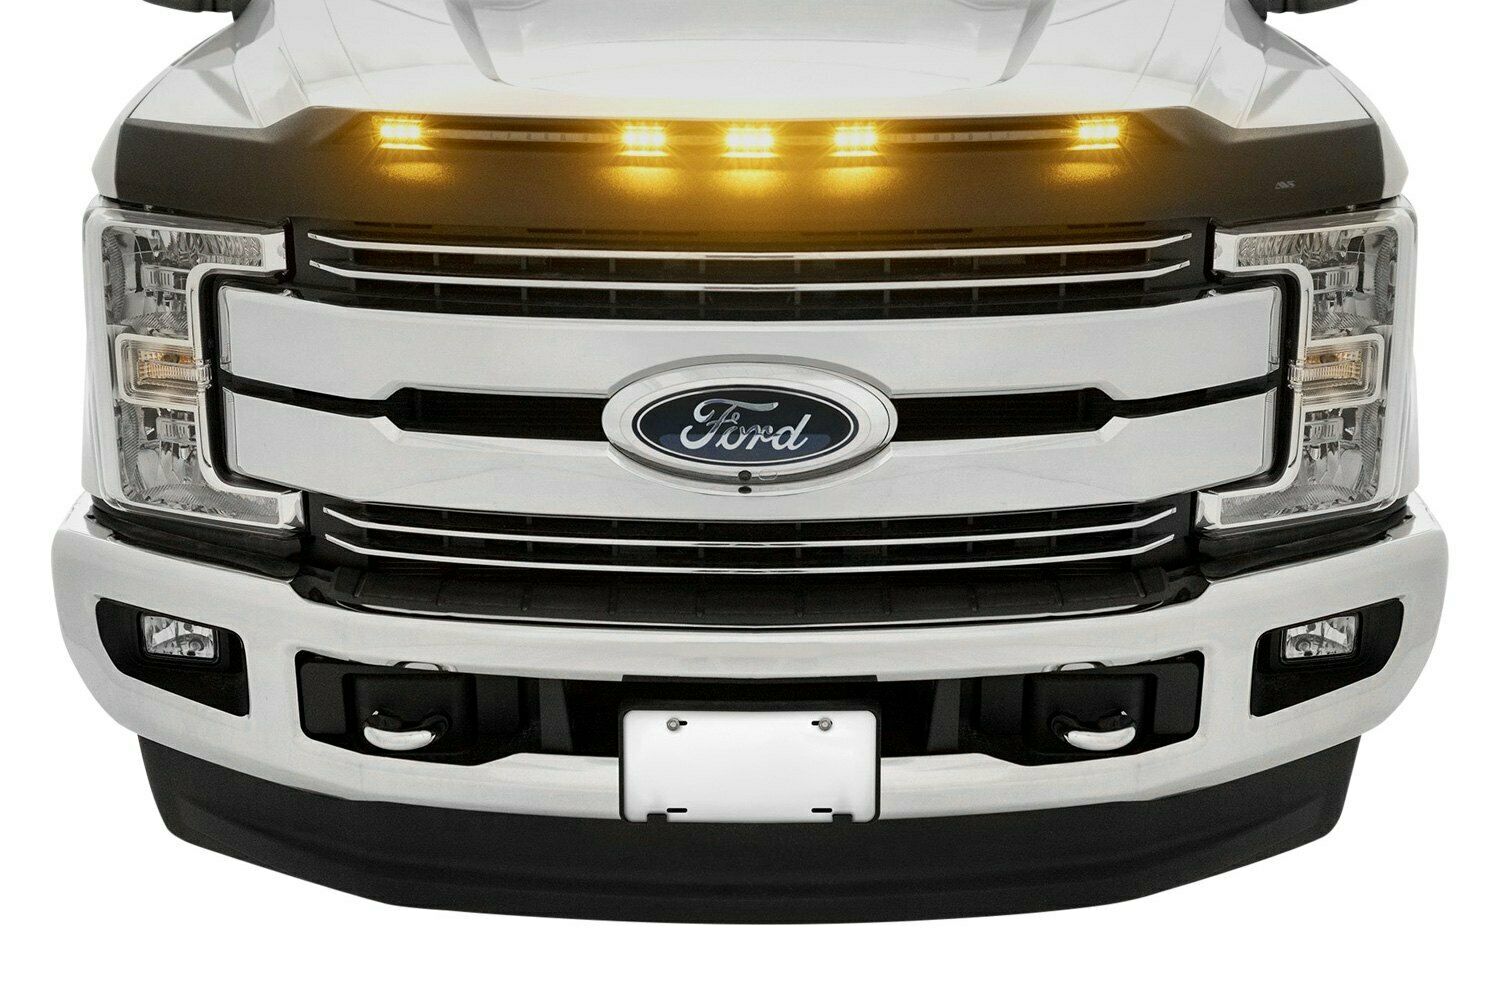 AVS Hood Protector Shield w/Light For Ford F-250 F-350 F-450 SD 17-20 - 753135